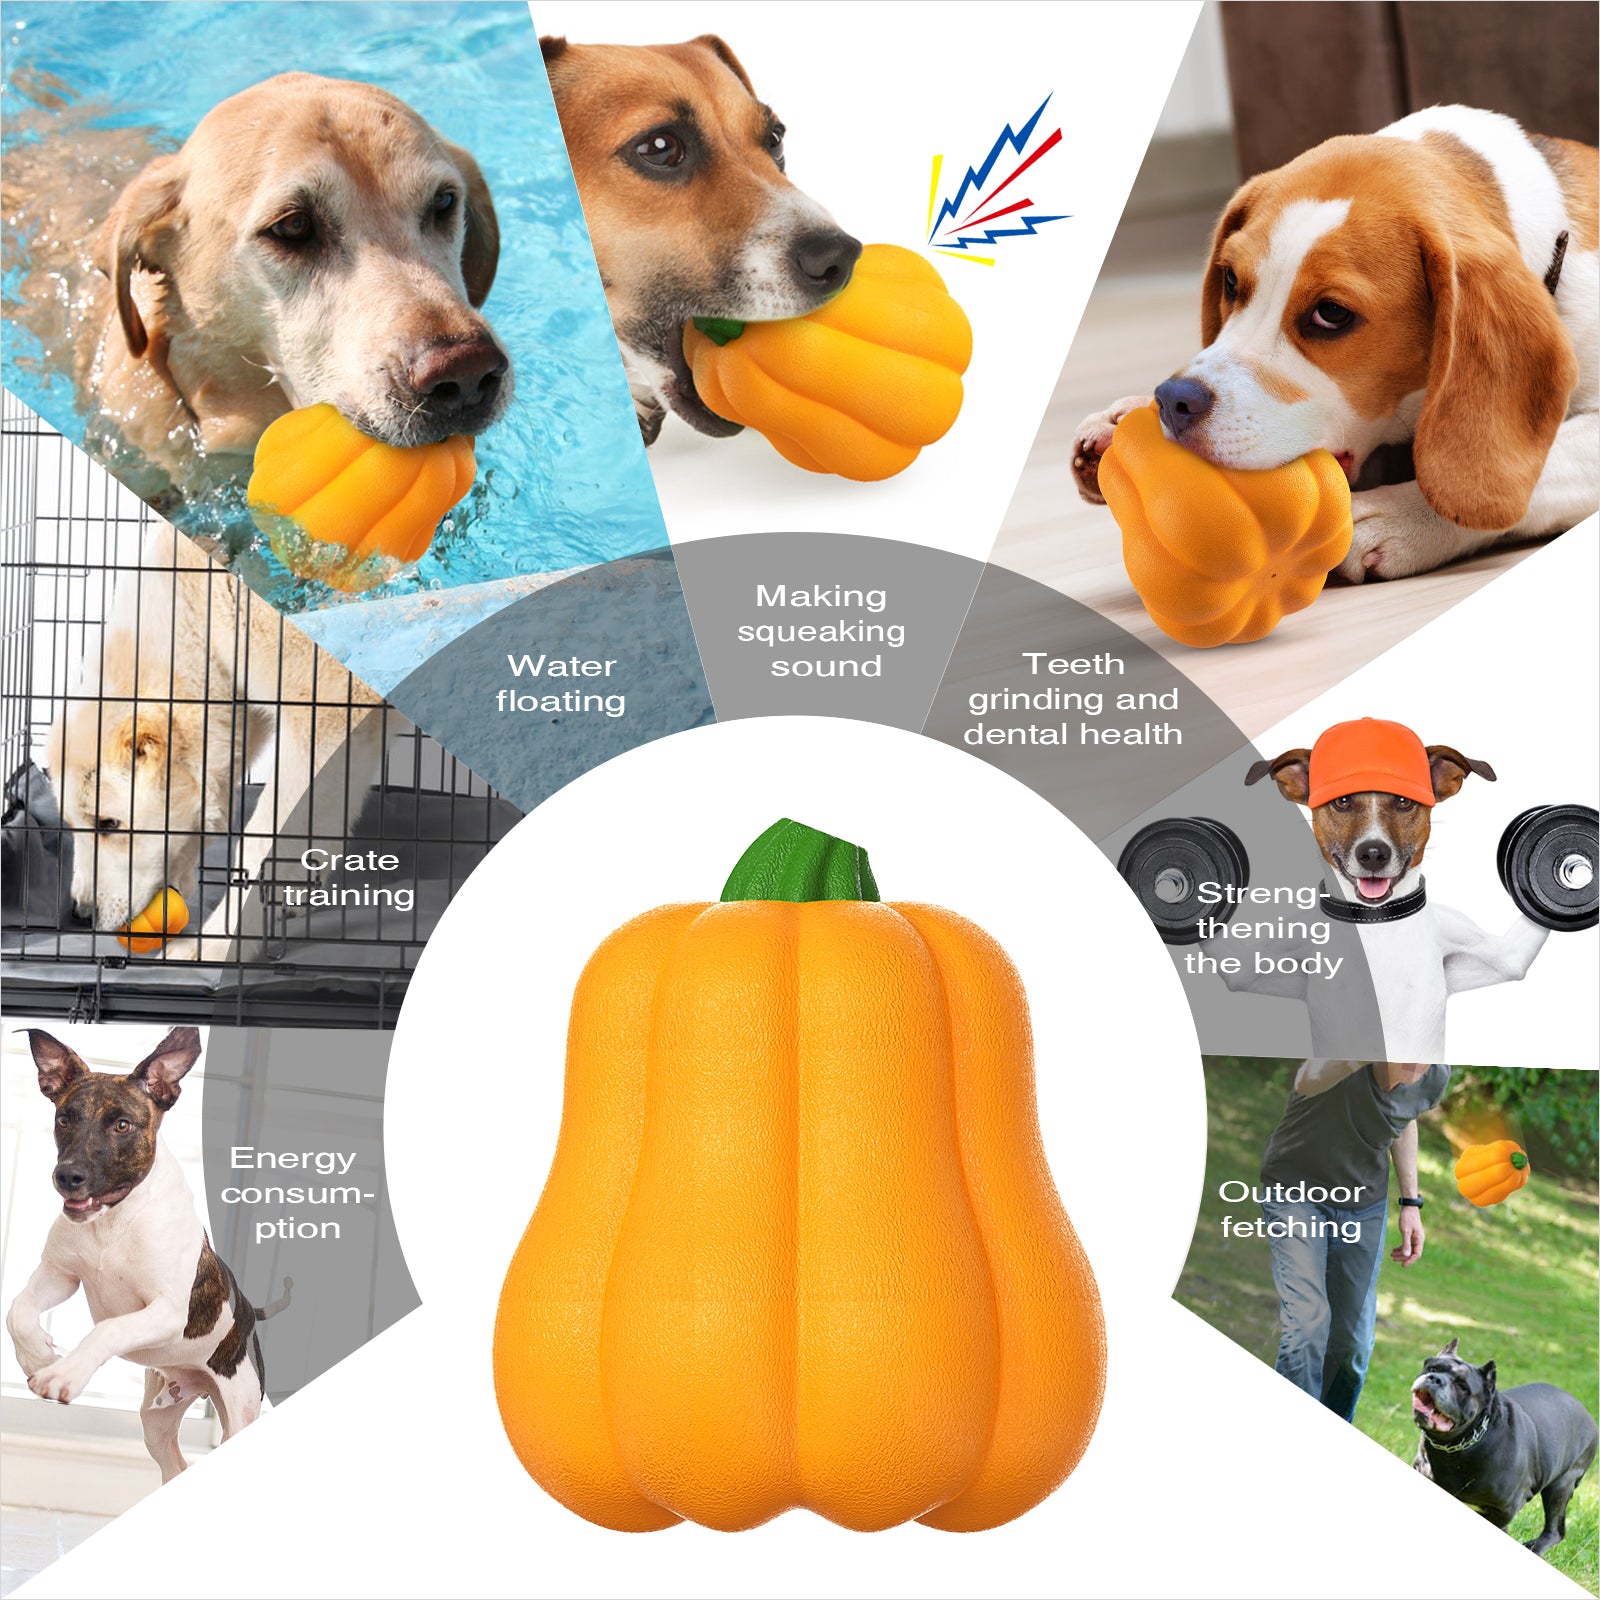 Dog Toys to help with Crate Training